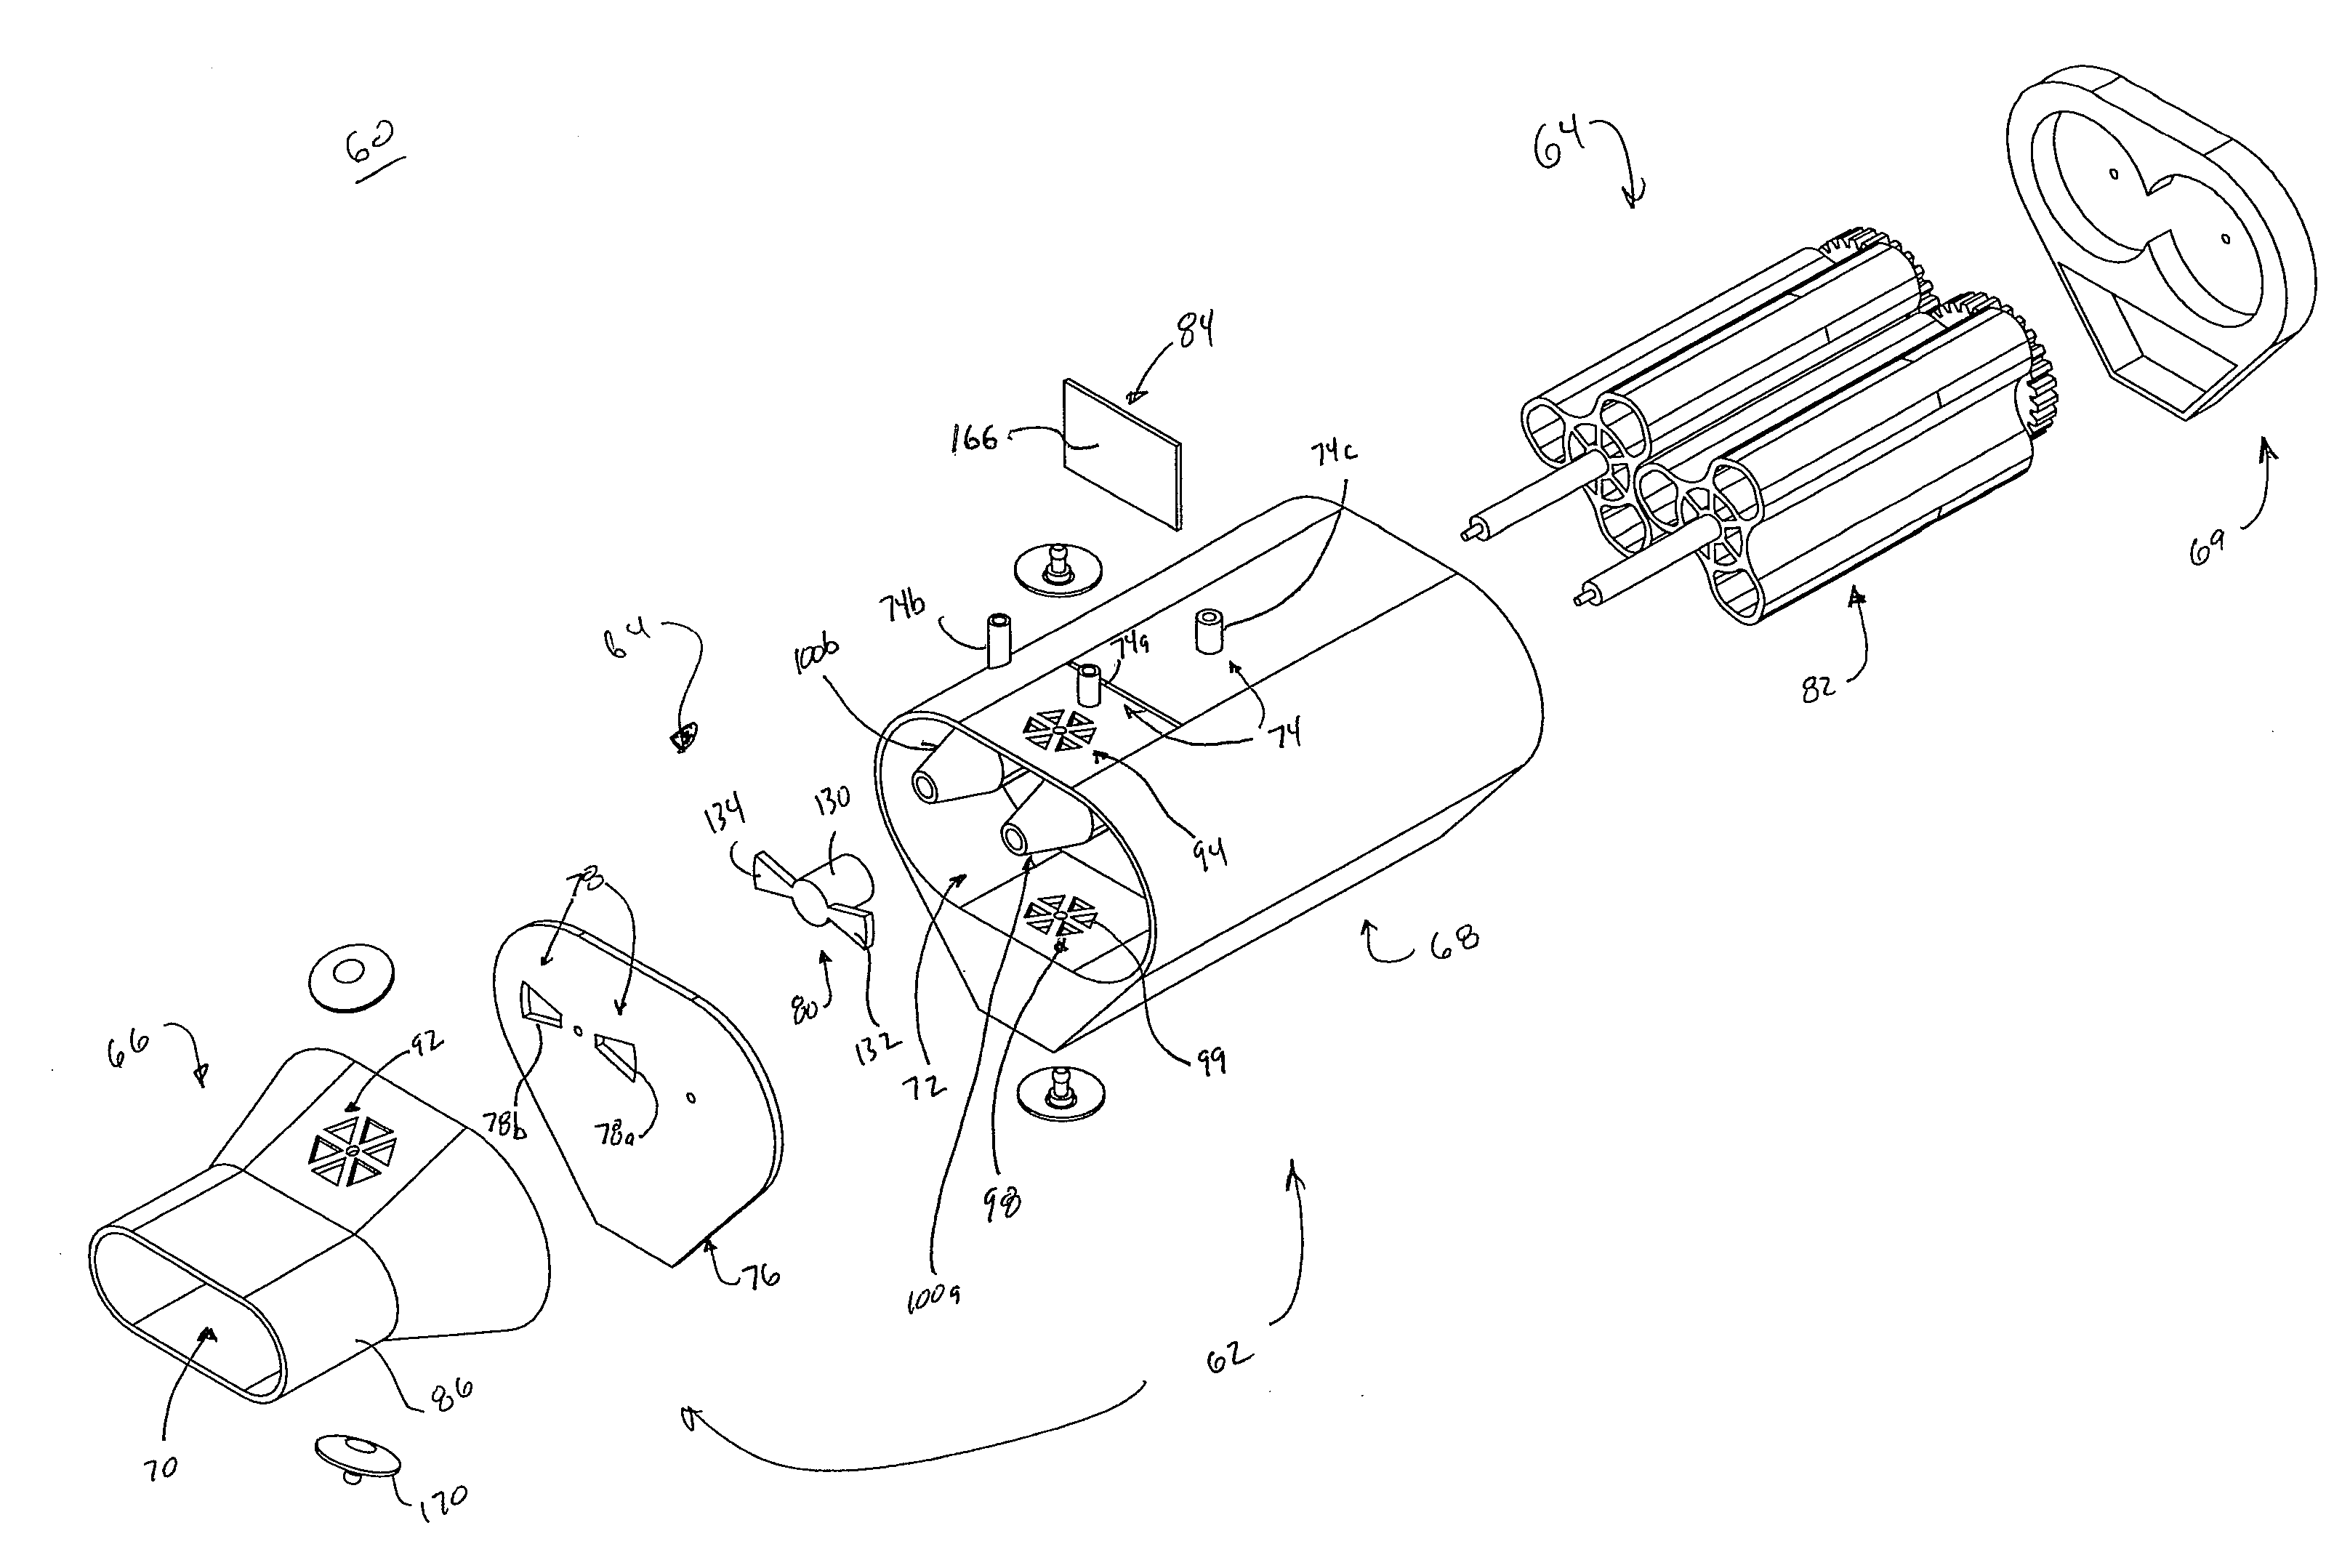 Respiratory therapy device and method